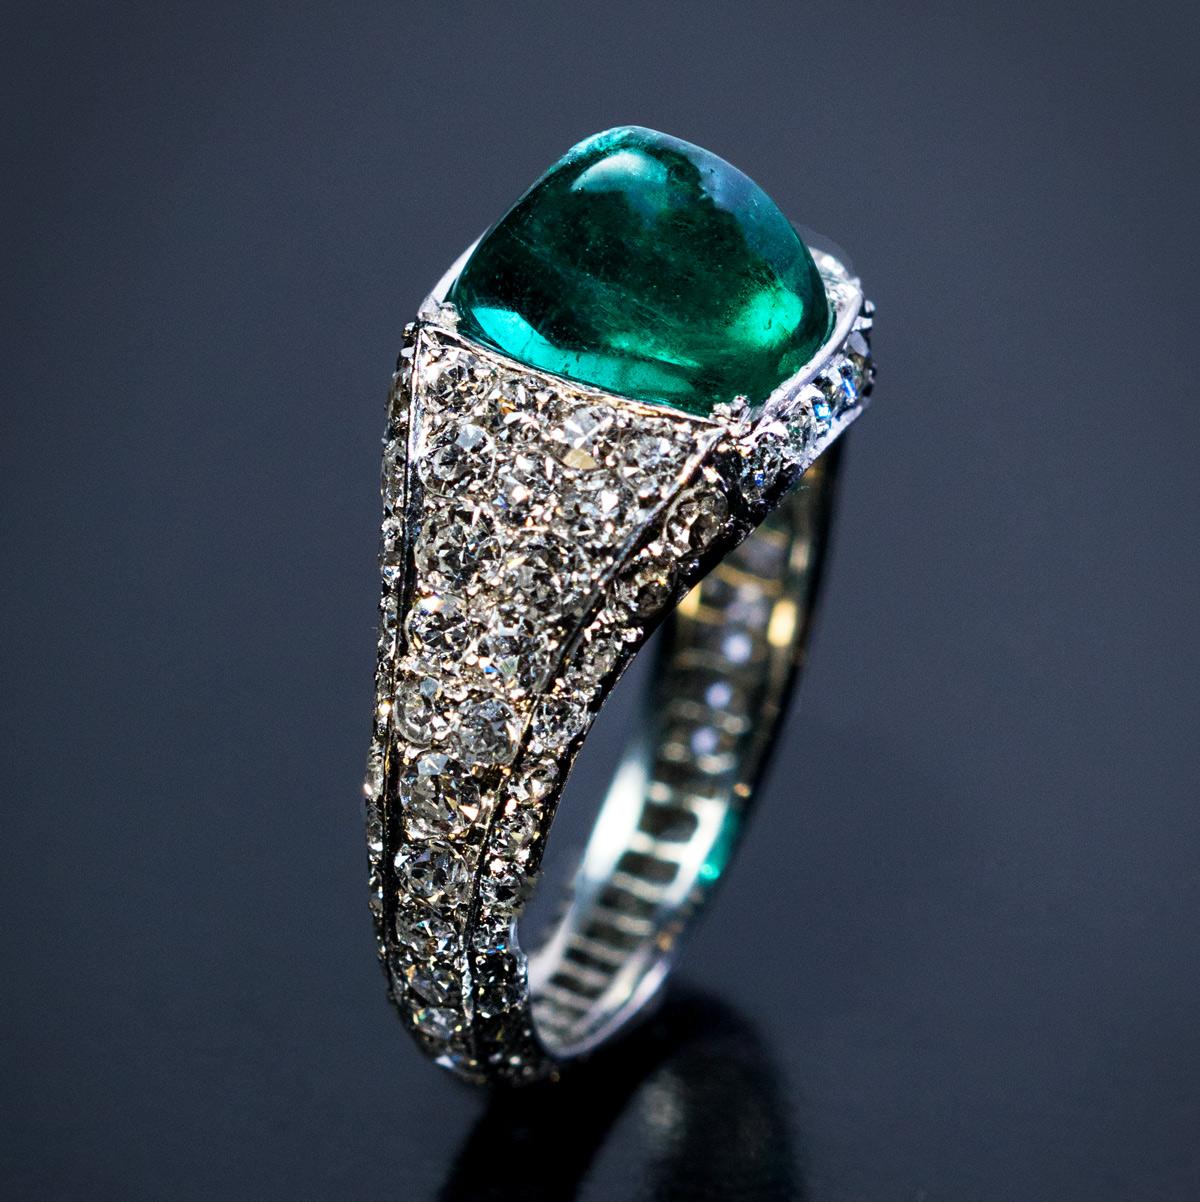 Circa 1925

This original Art Deco diamond encrusted platinum engagement ring features a pyramidal cabochon cut (sugarloaf) Colombian emerald of an excellent color and saturation.
The emerald measures 8.7 x 7.5 x 6.44 mm and is approximately 3.14